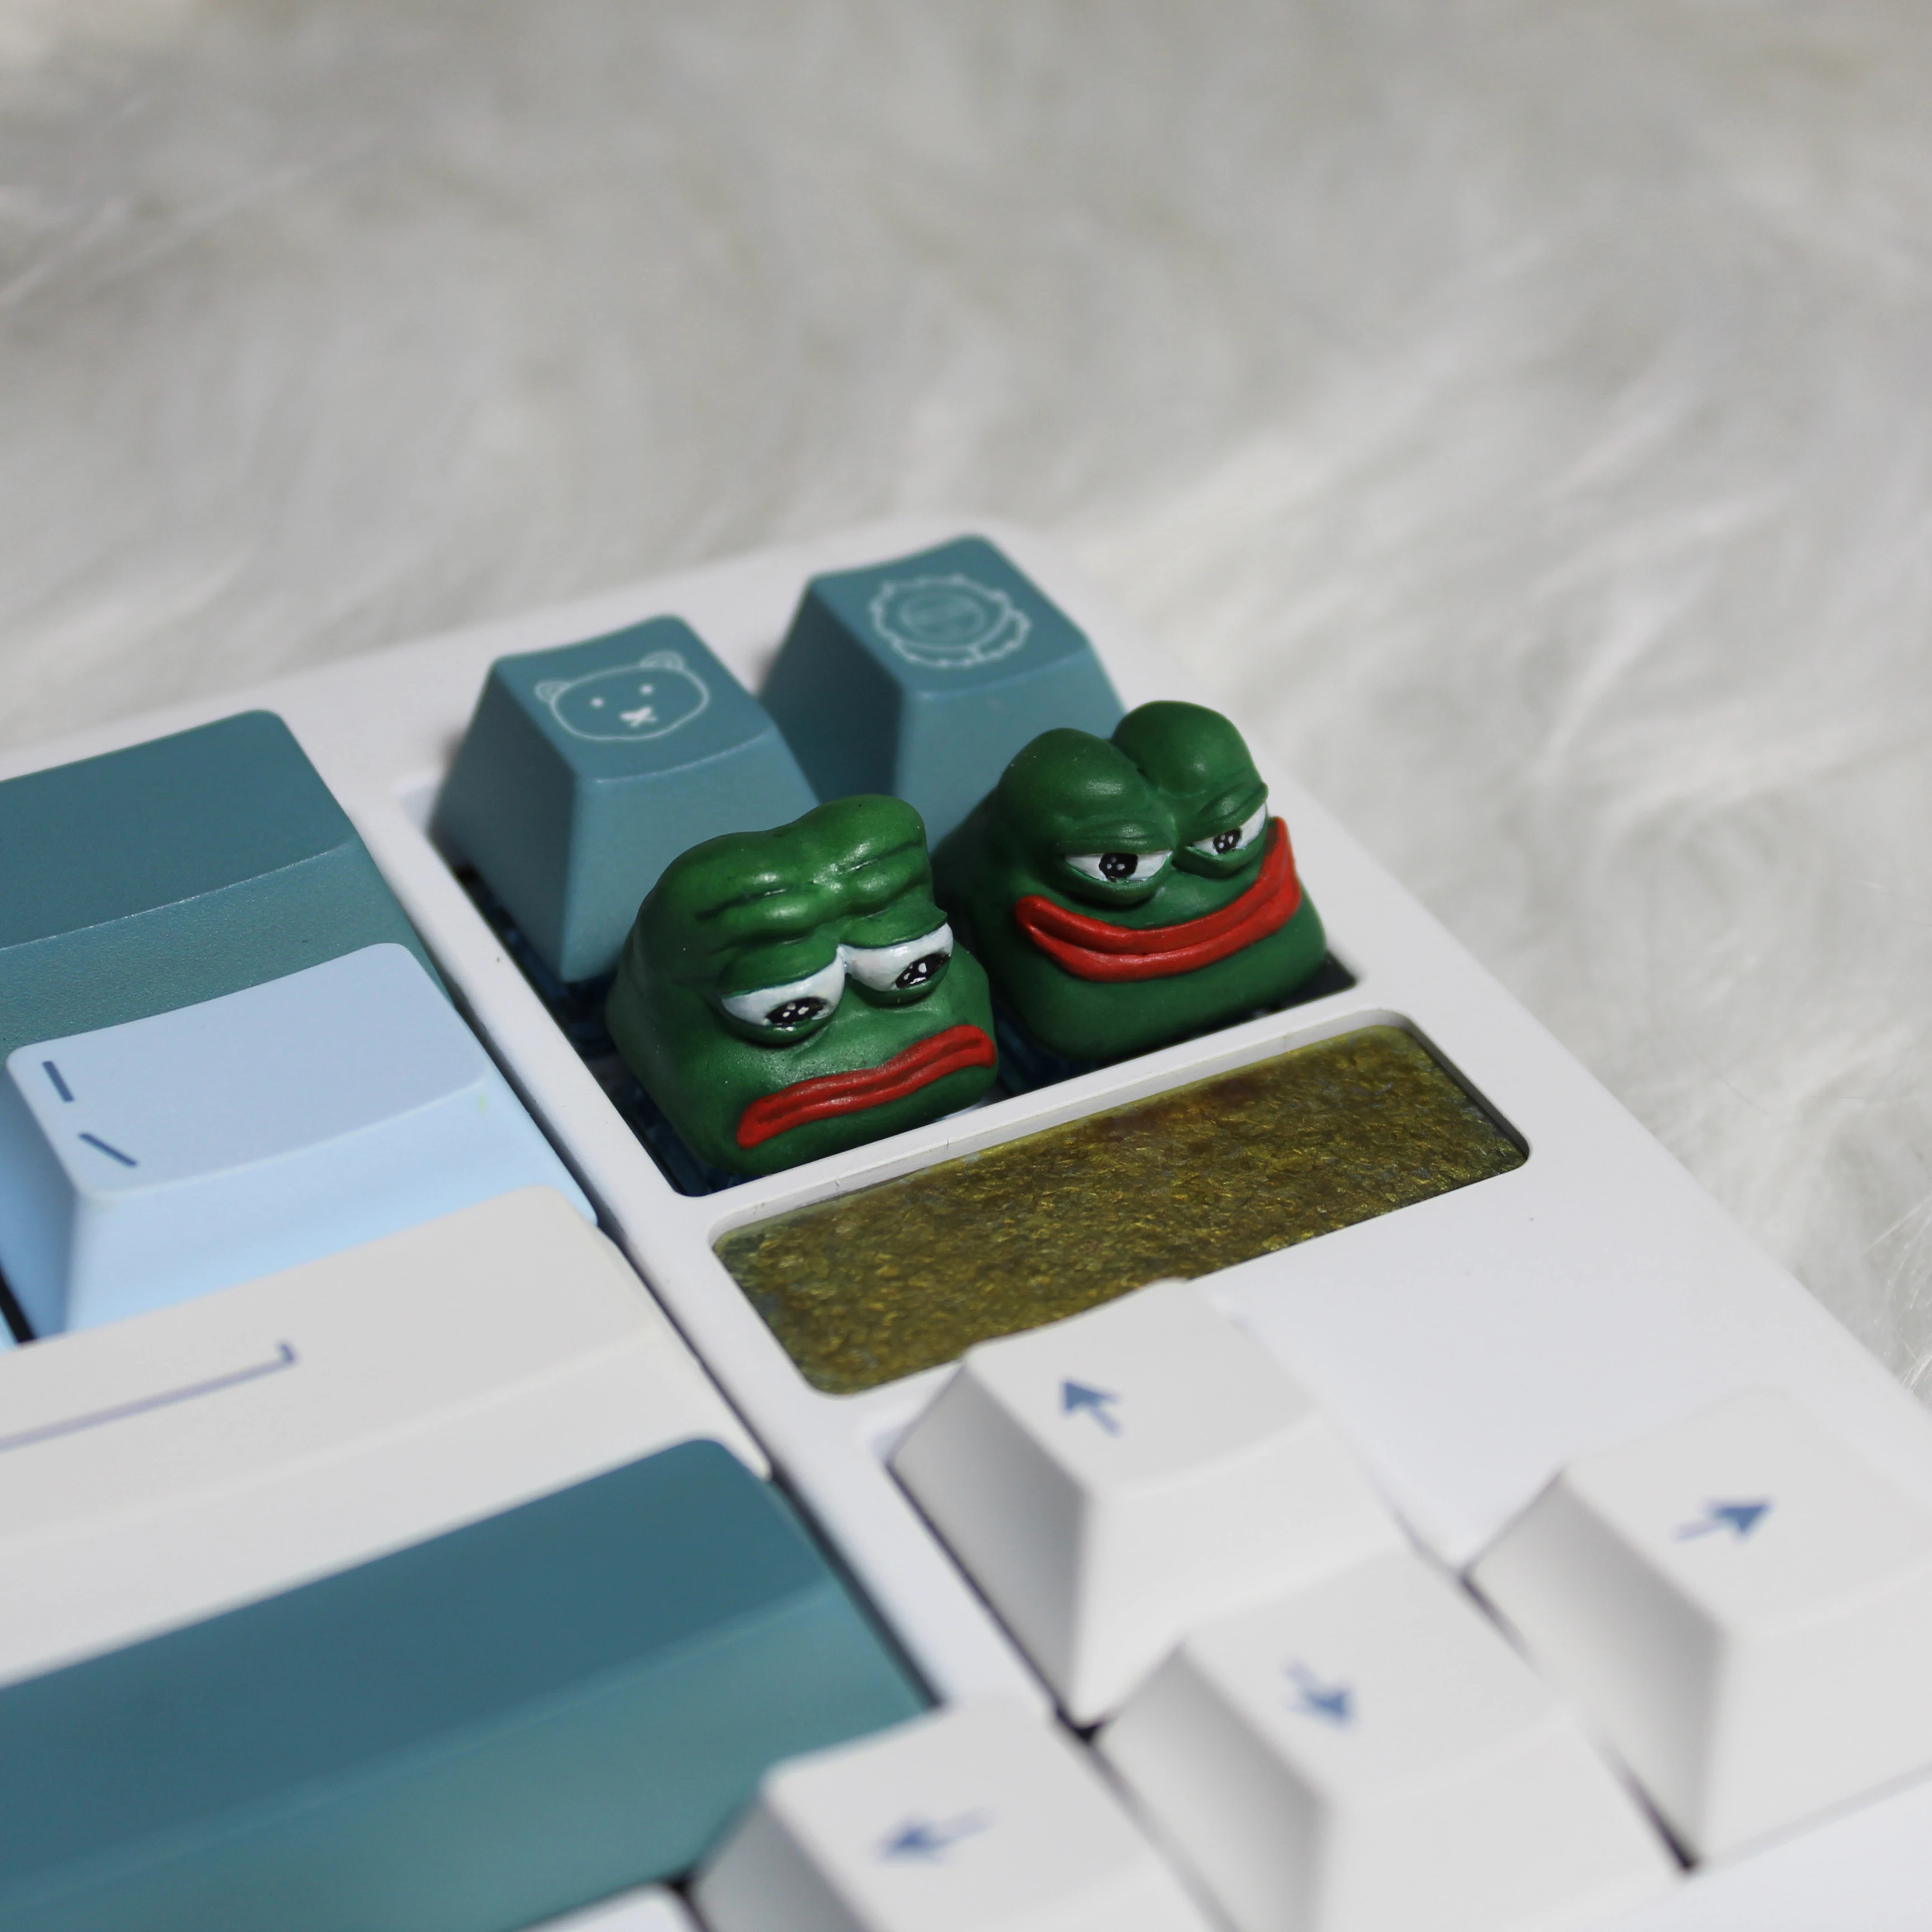 

Sad Frog Resin Keycap Cherry Mx Switch Mechanical Keyboard ESC R4 Cross Axis Button Crying Green Stereo Personalized Keycaps 1pc